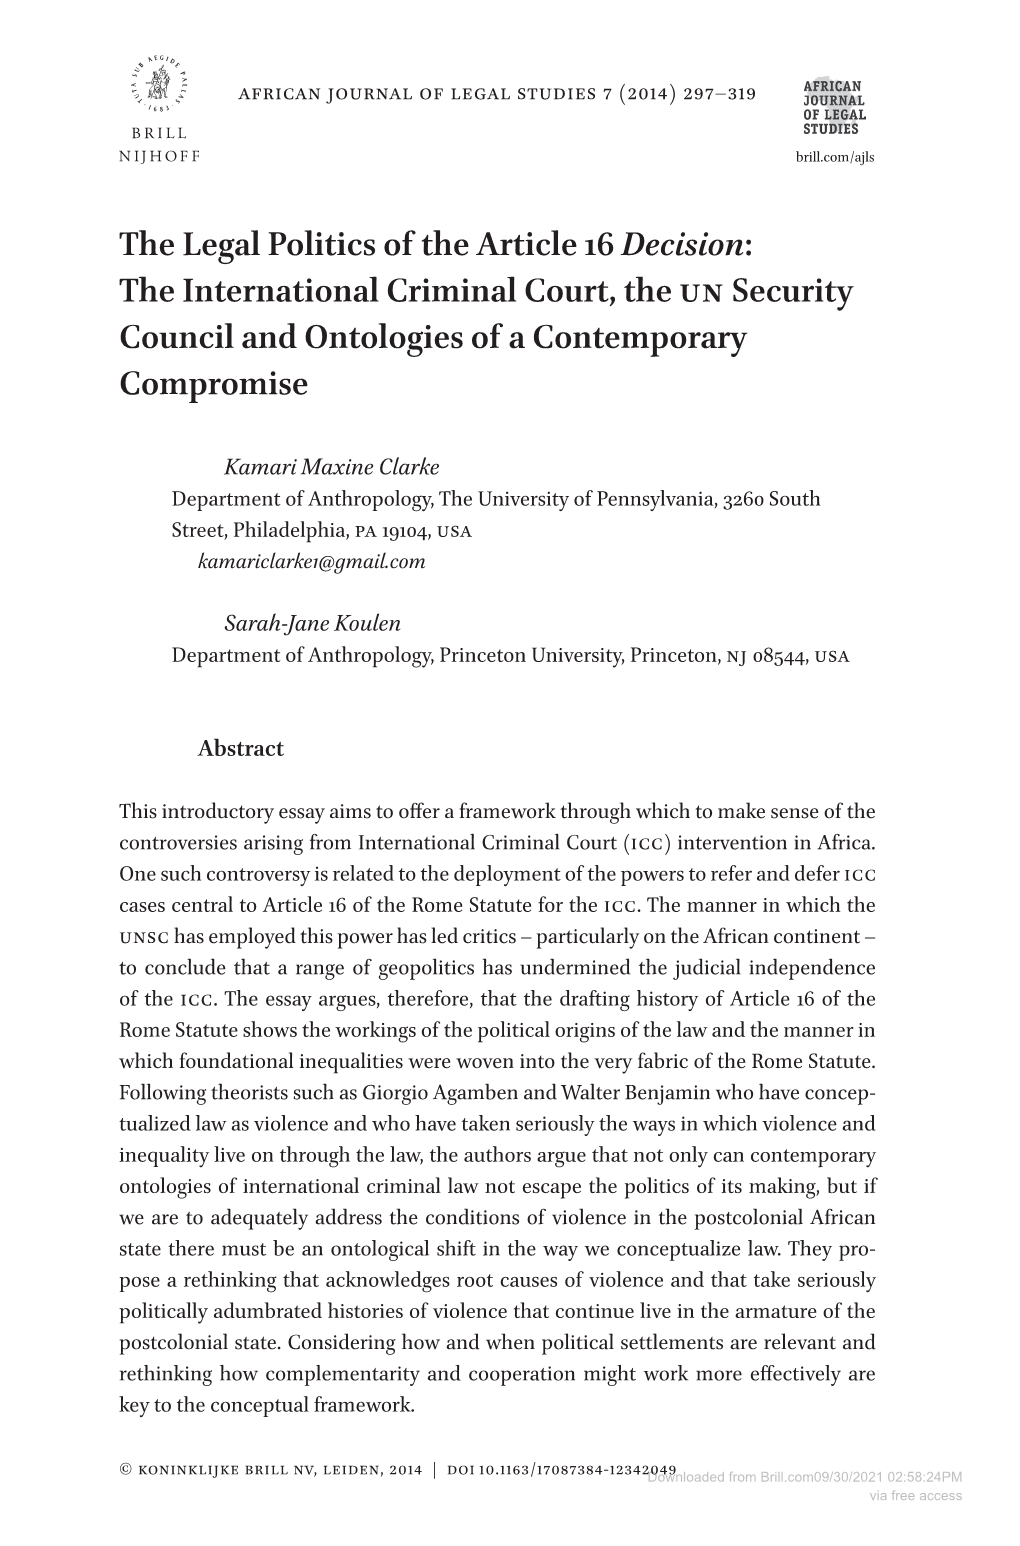 The Legal Politics of the Article 16 Decision: the International Criminal Court, the UN Security Council and Ontologies of a Contemporary Compromise